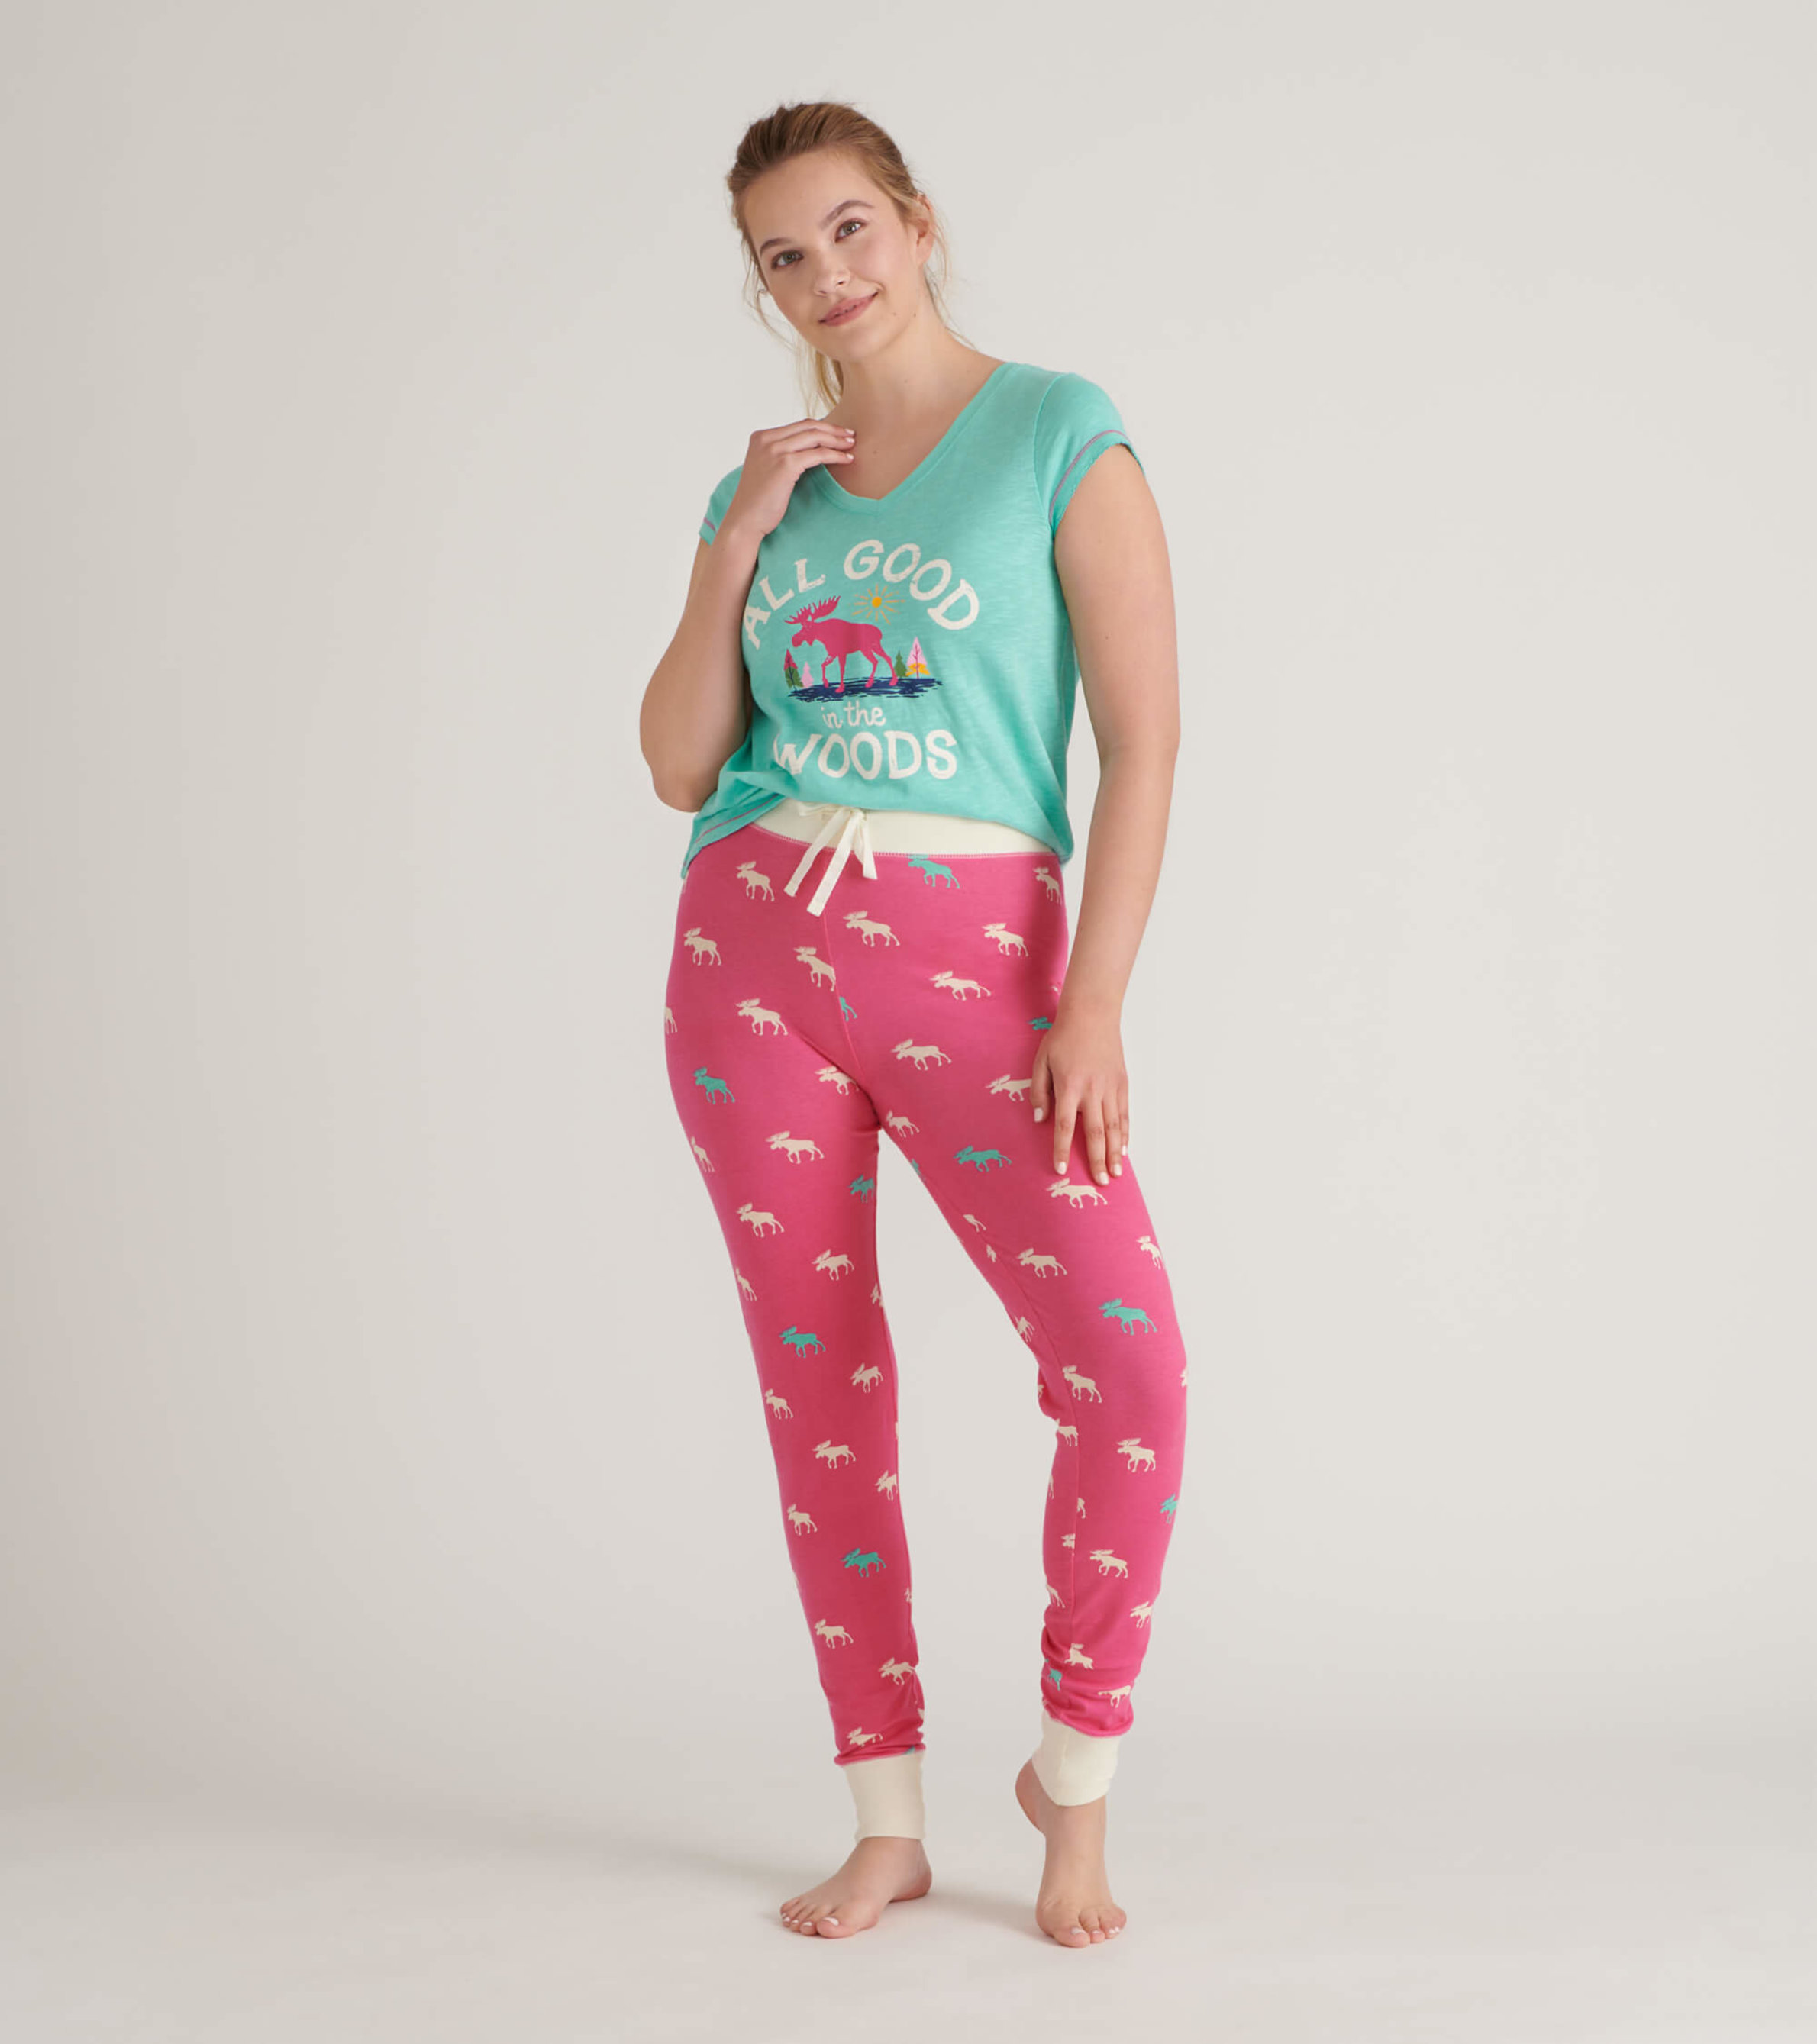 Hiking Trail Women's Tee and Leggings Pajama Separates - Little Blue House  US